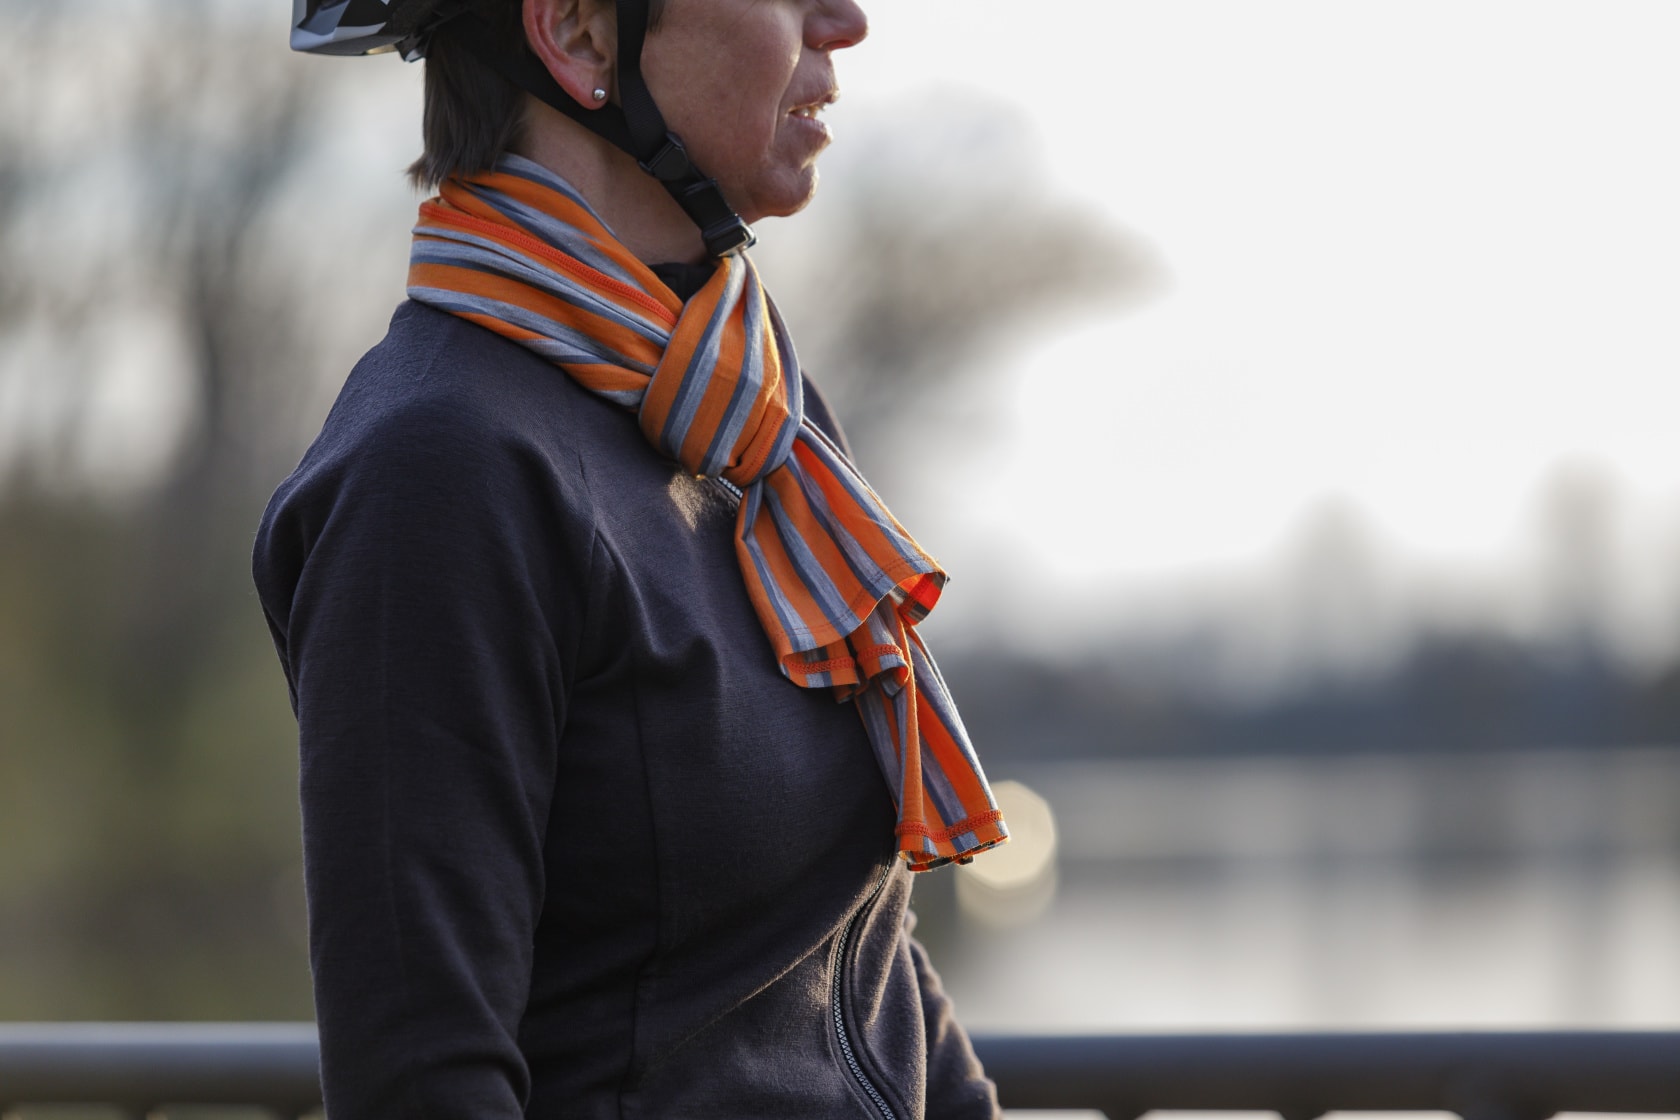 Right profile view of a person wearing a Surly Wool Scarf - Orange, Light Gray and blue parallel stripes 